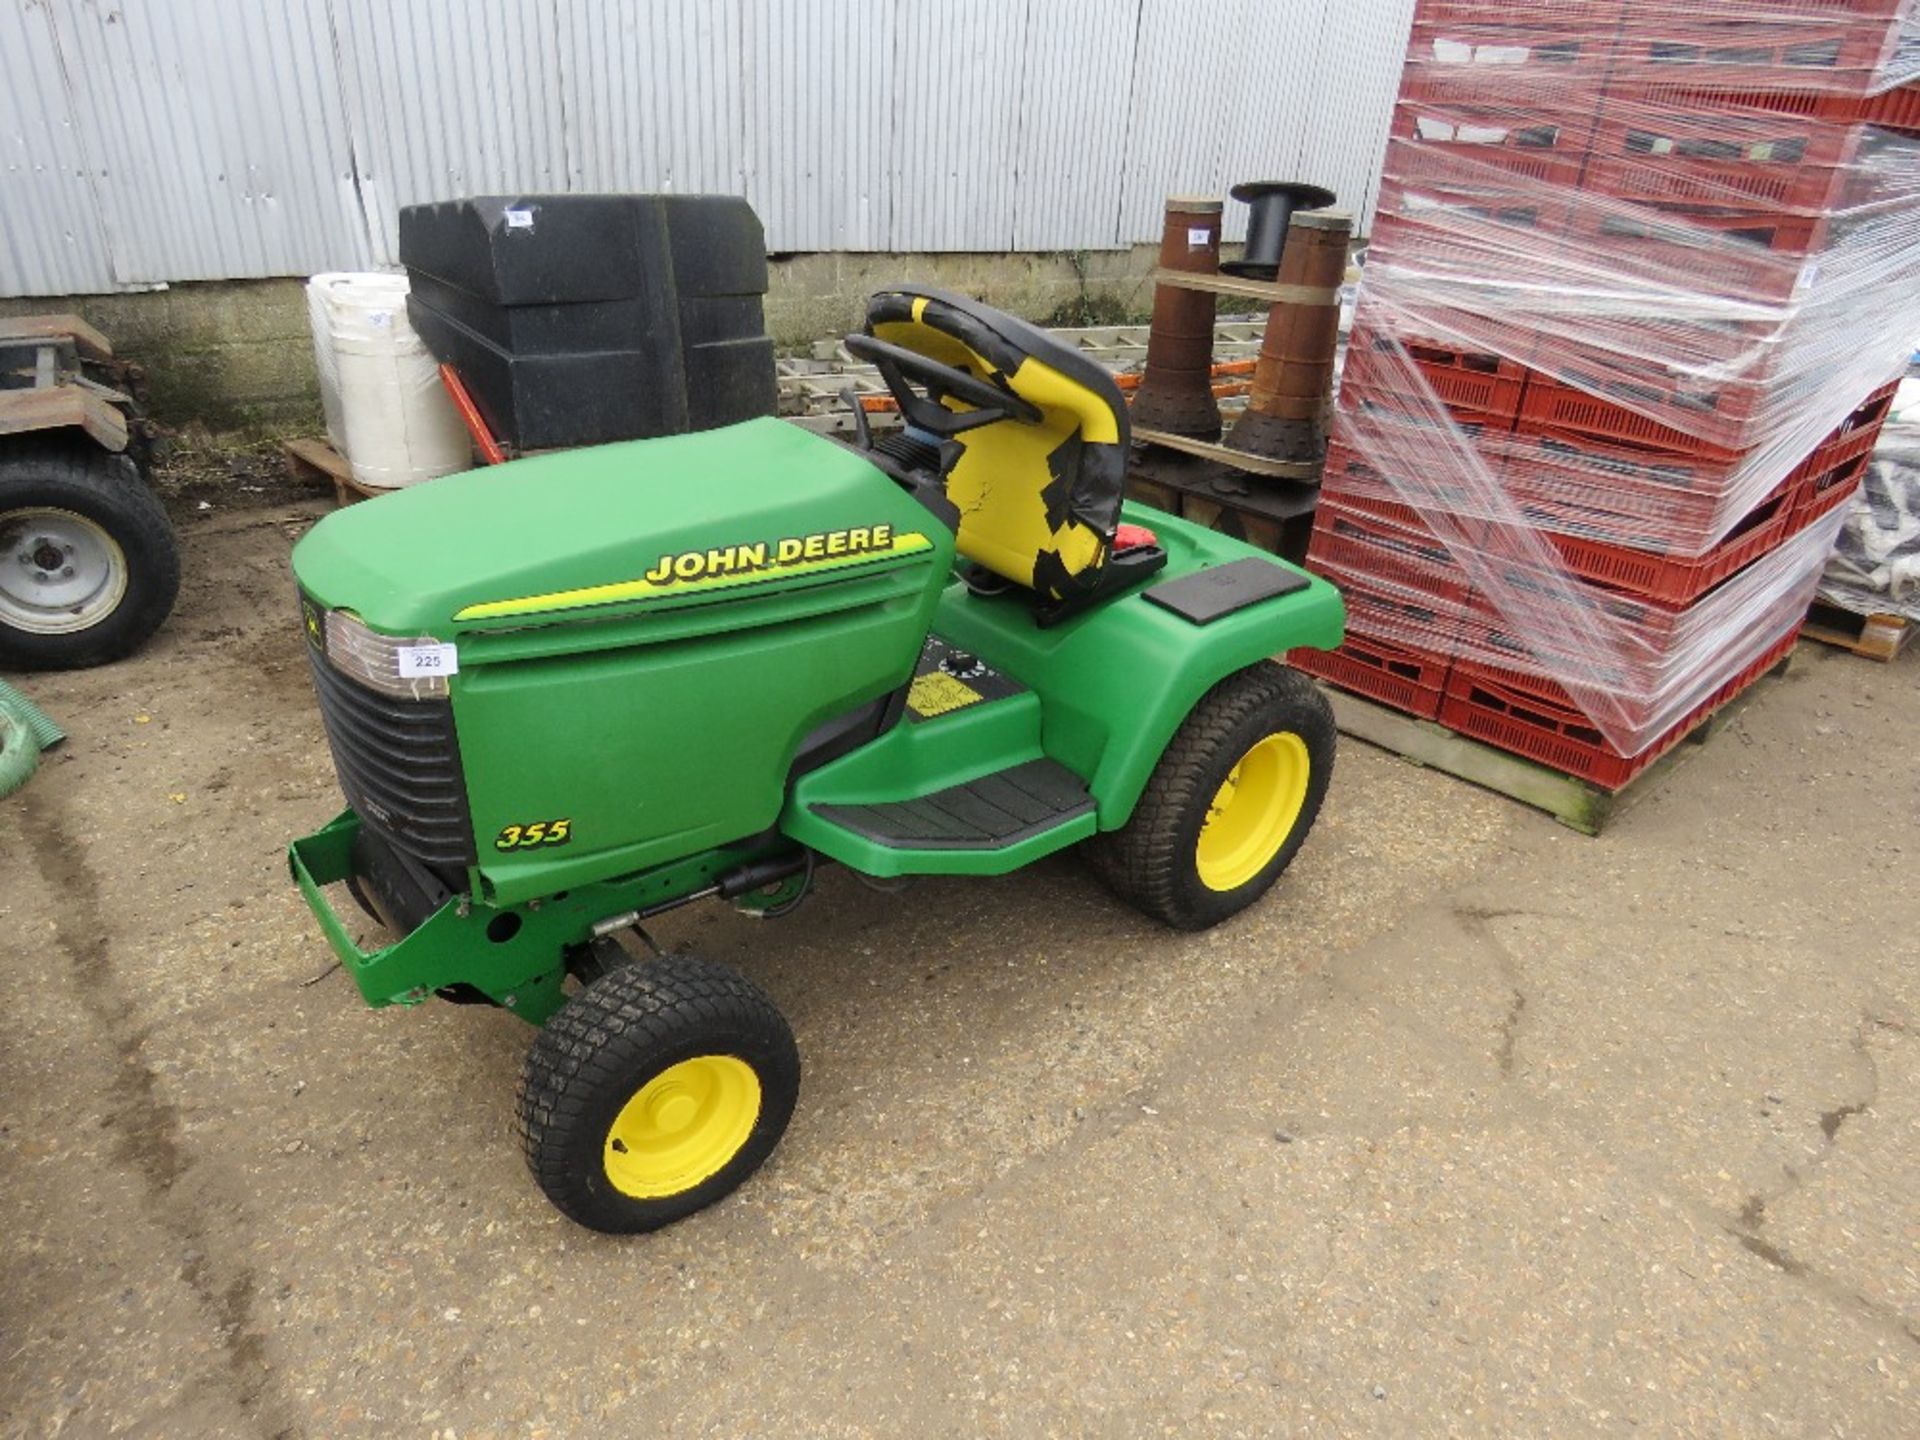 JOHN DEERE 355 diesel ENGINED LAWN TRACTOR, CONDITION UNKNOWN.